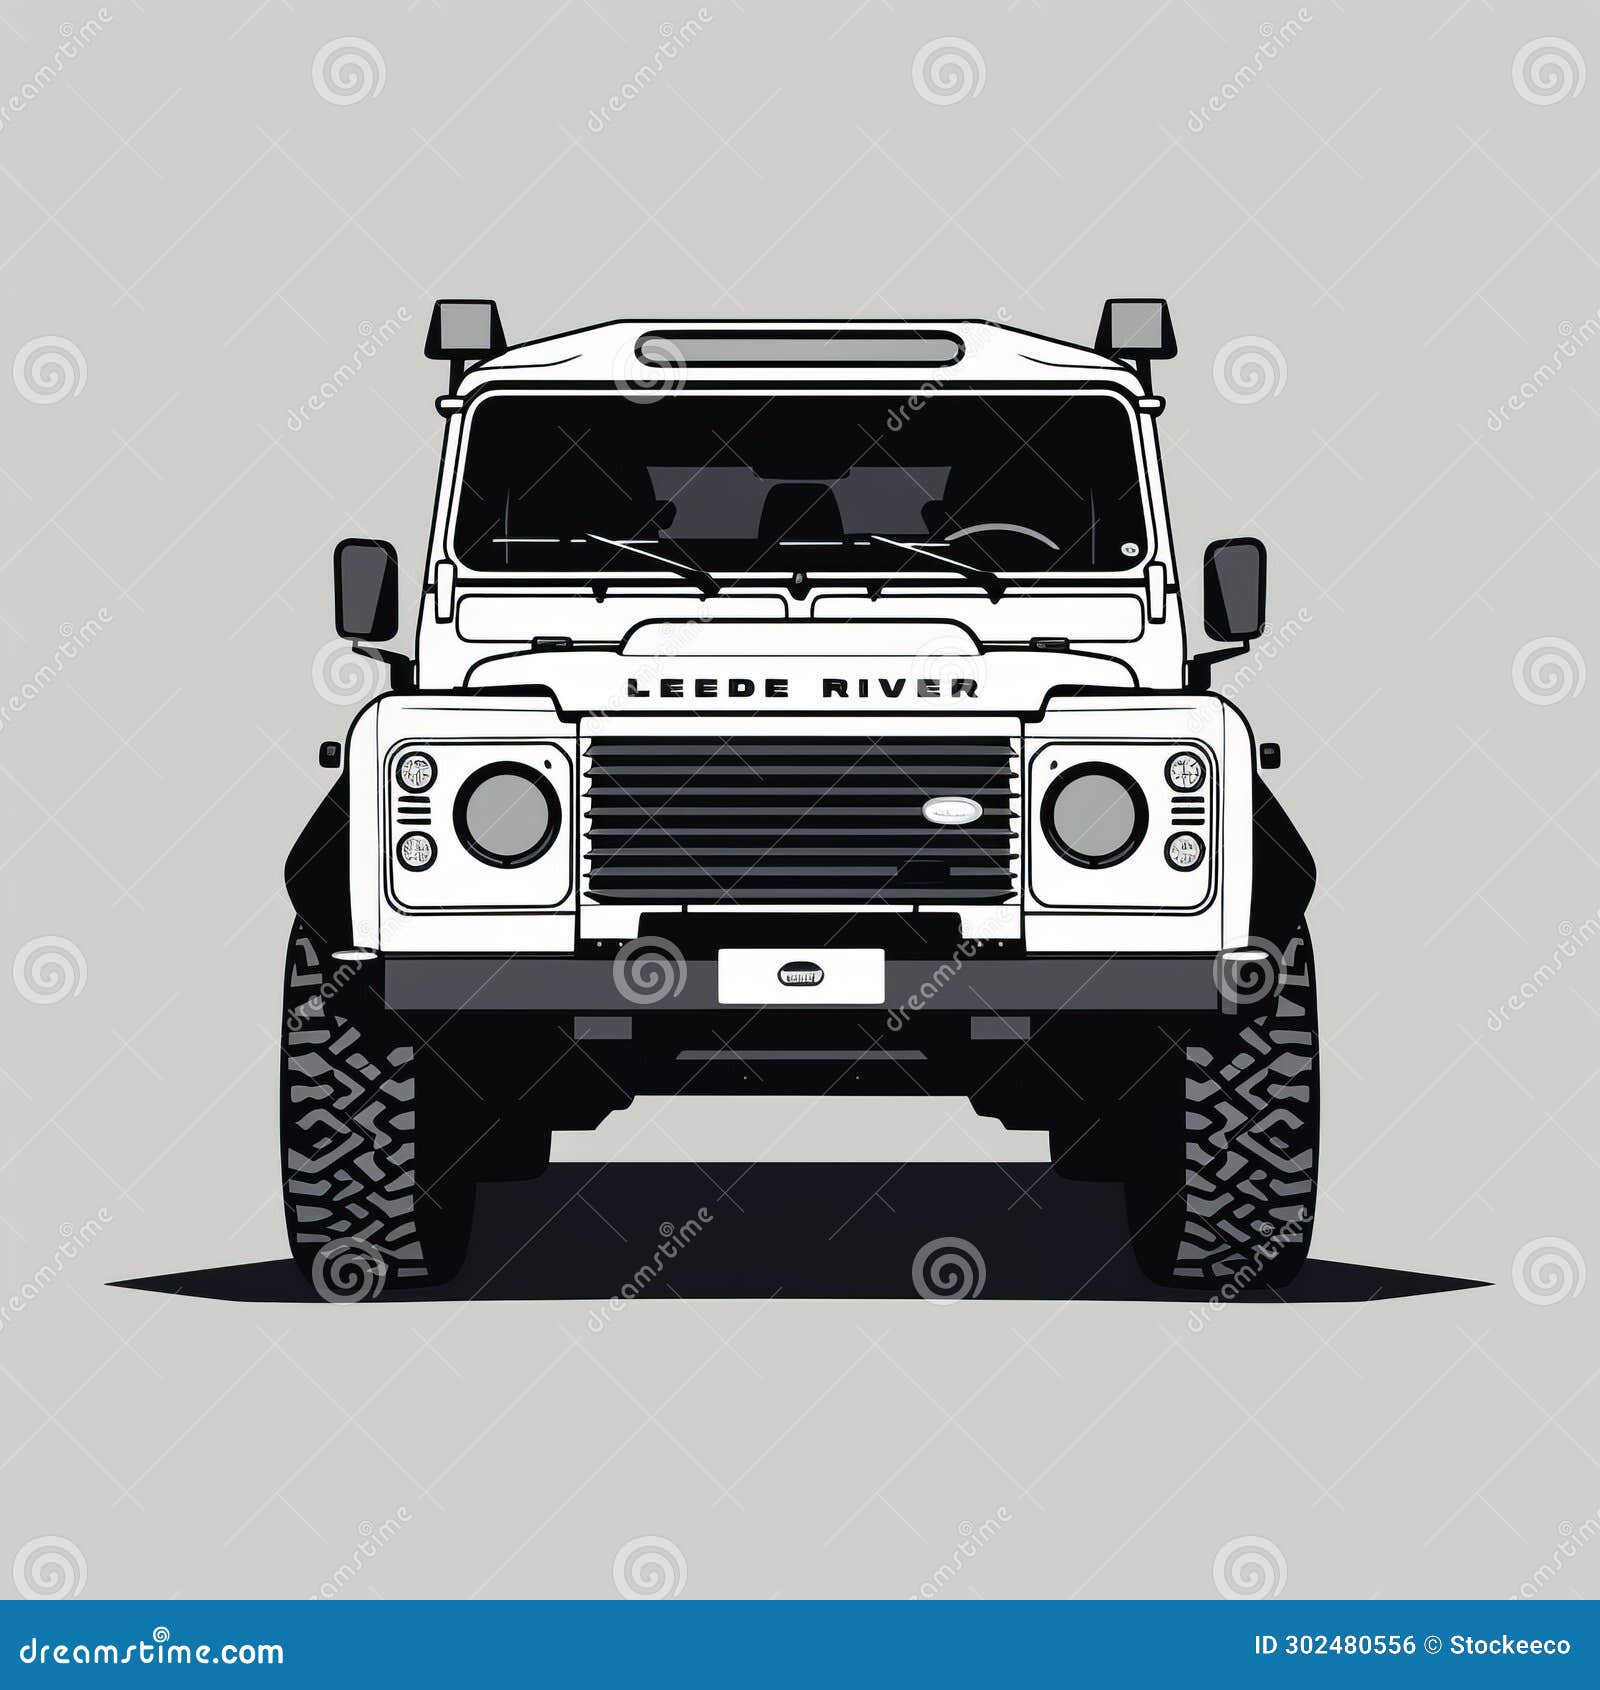 Land Rover Defender Images – Browse 2,165 Stock Photos, Vectors